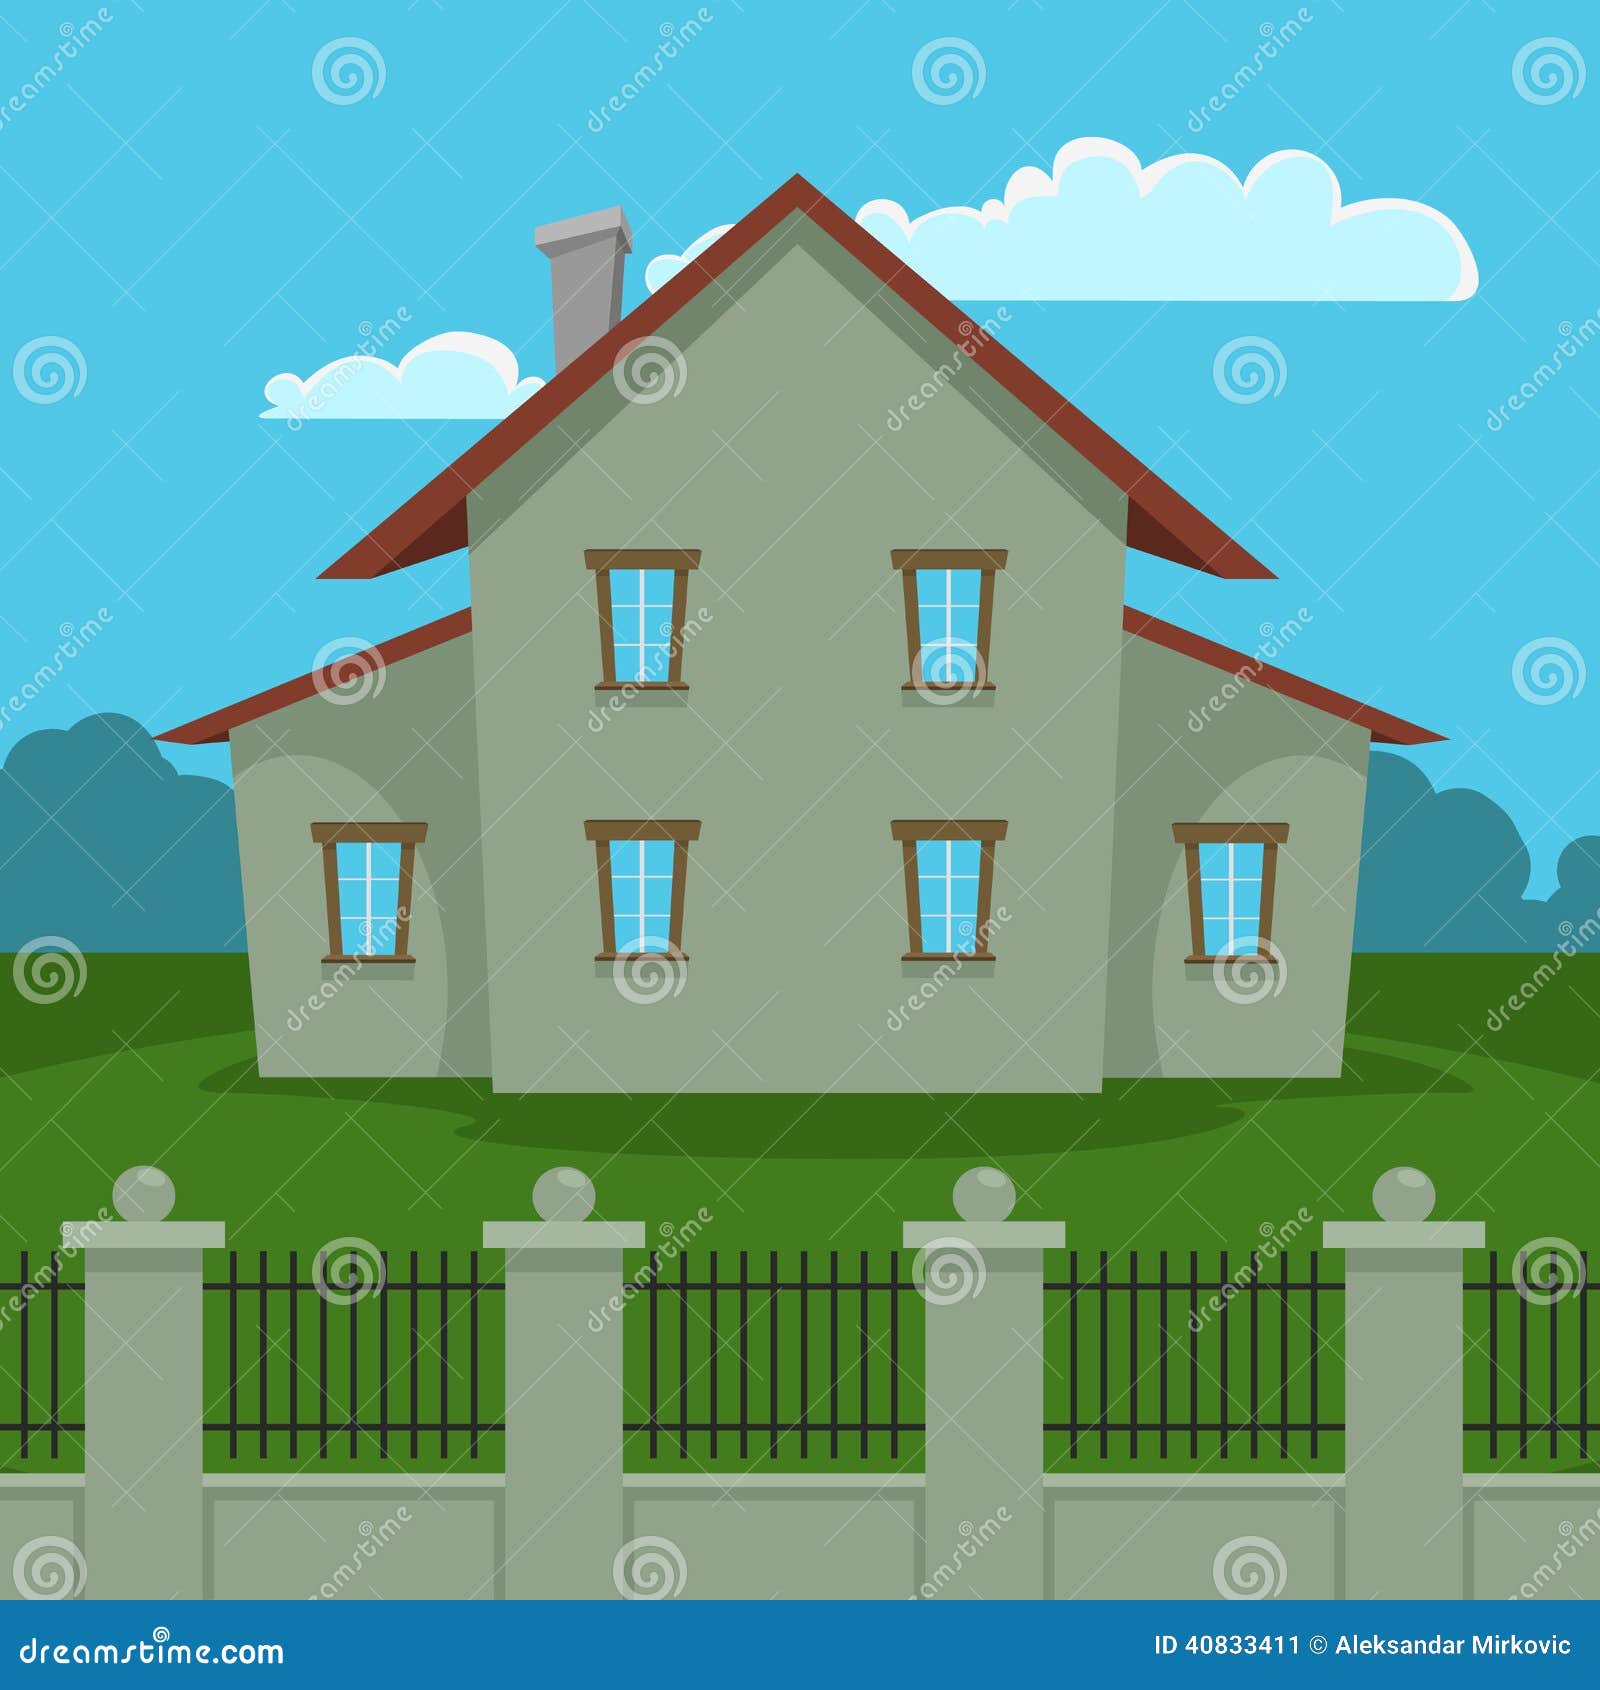 House With Fence Stock Vector Image 40833411